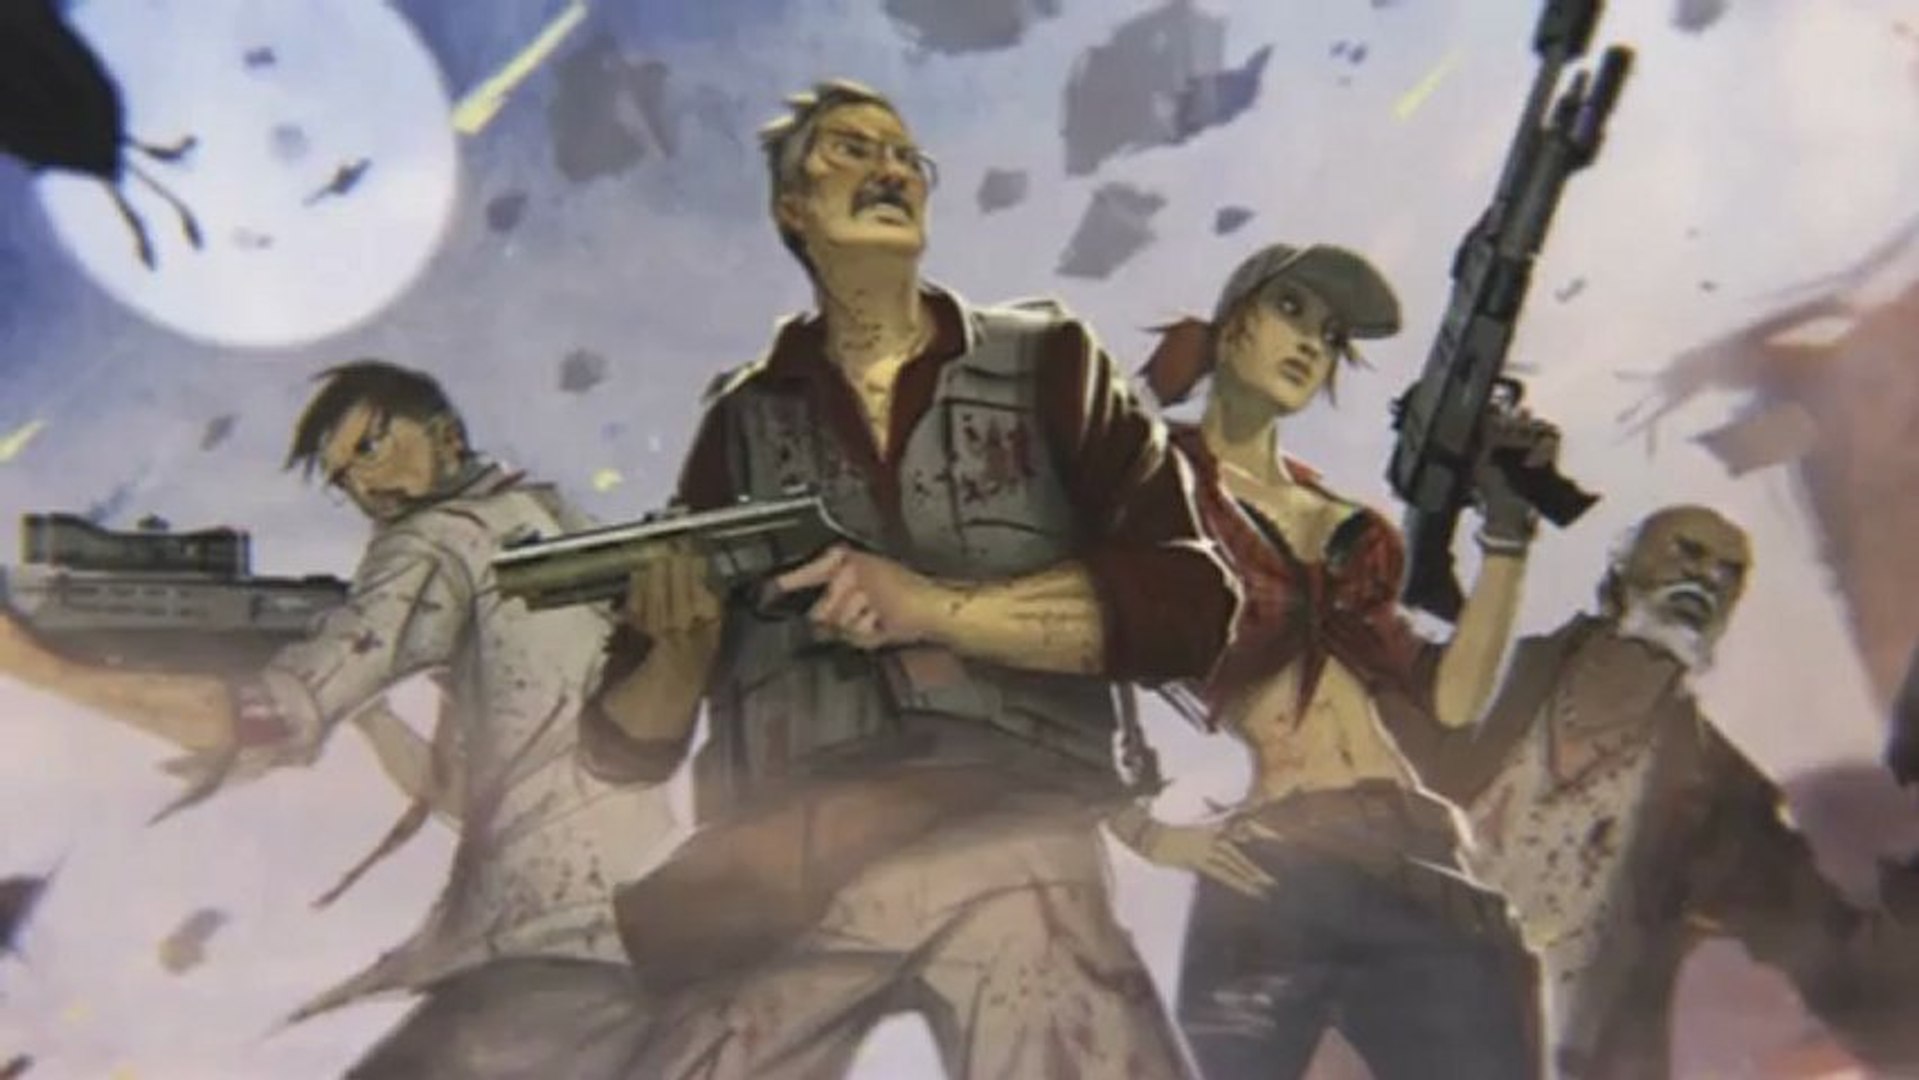 Black Ops 2 - Die Rise - NEW Zombie Map Details! 'Revolution